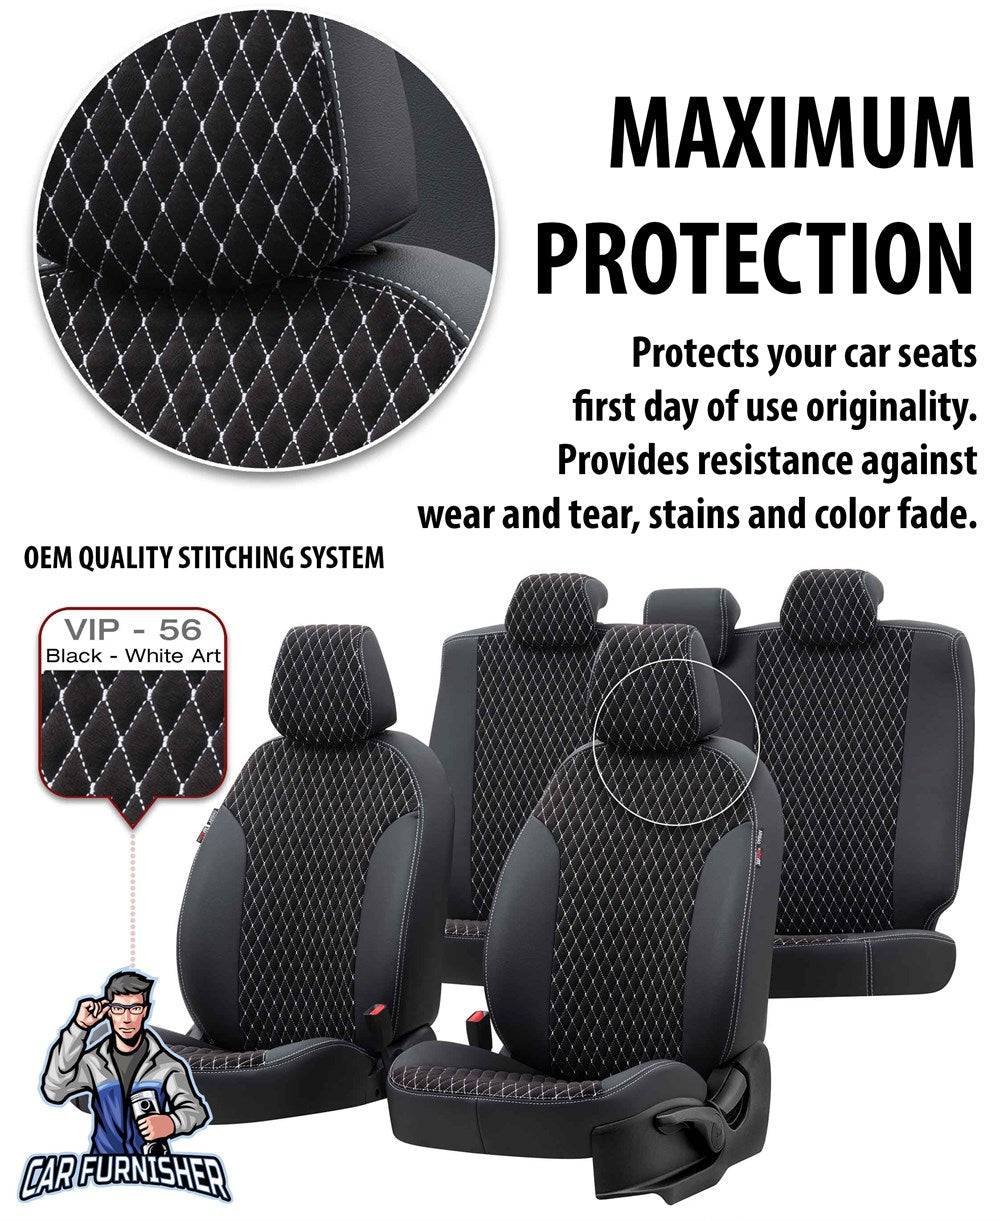 Chevrolet Rezzo Car Seat Covers 2004-2008 CDX/U100 Amsterdam Feather Smoked Black Full Set (5 Seats + Handrest) Leather & Foal Feather